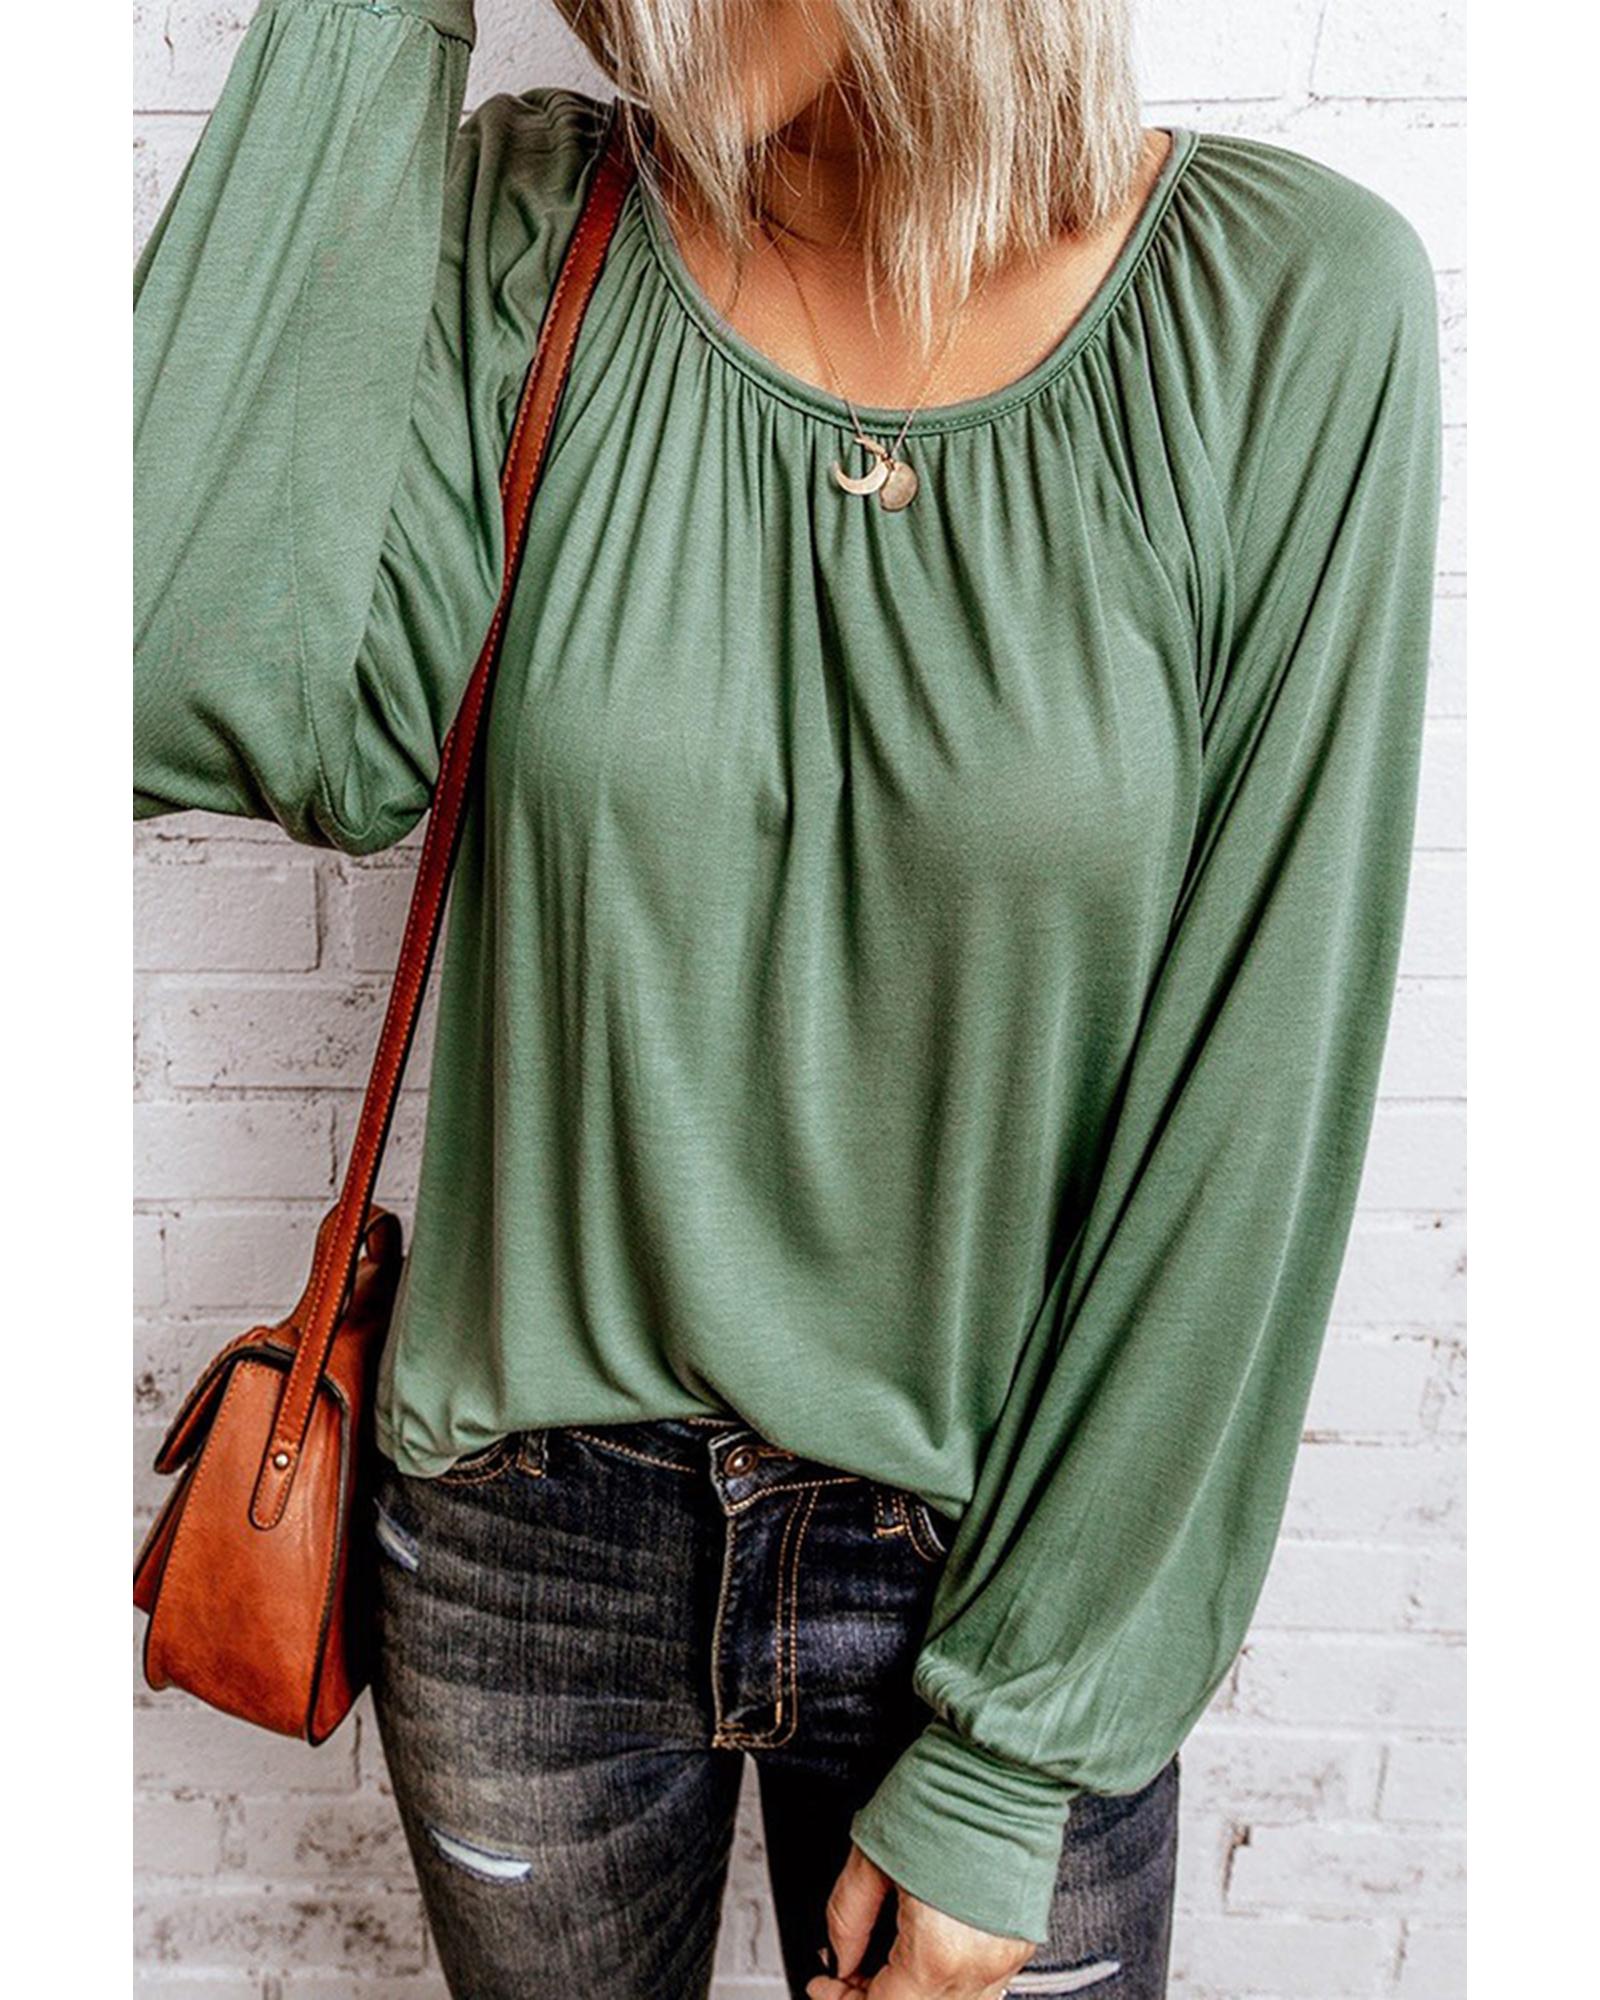 Gathered Bubble Sleeve Top - S